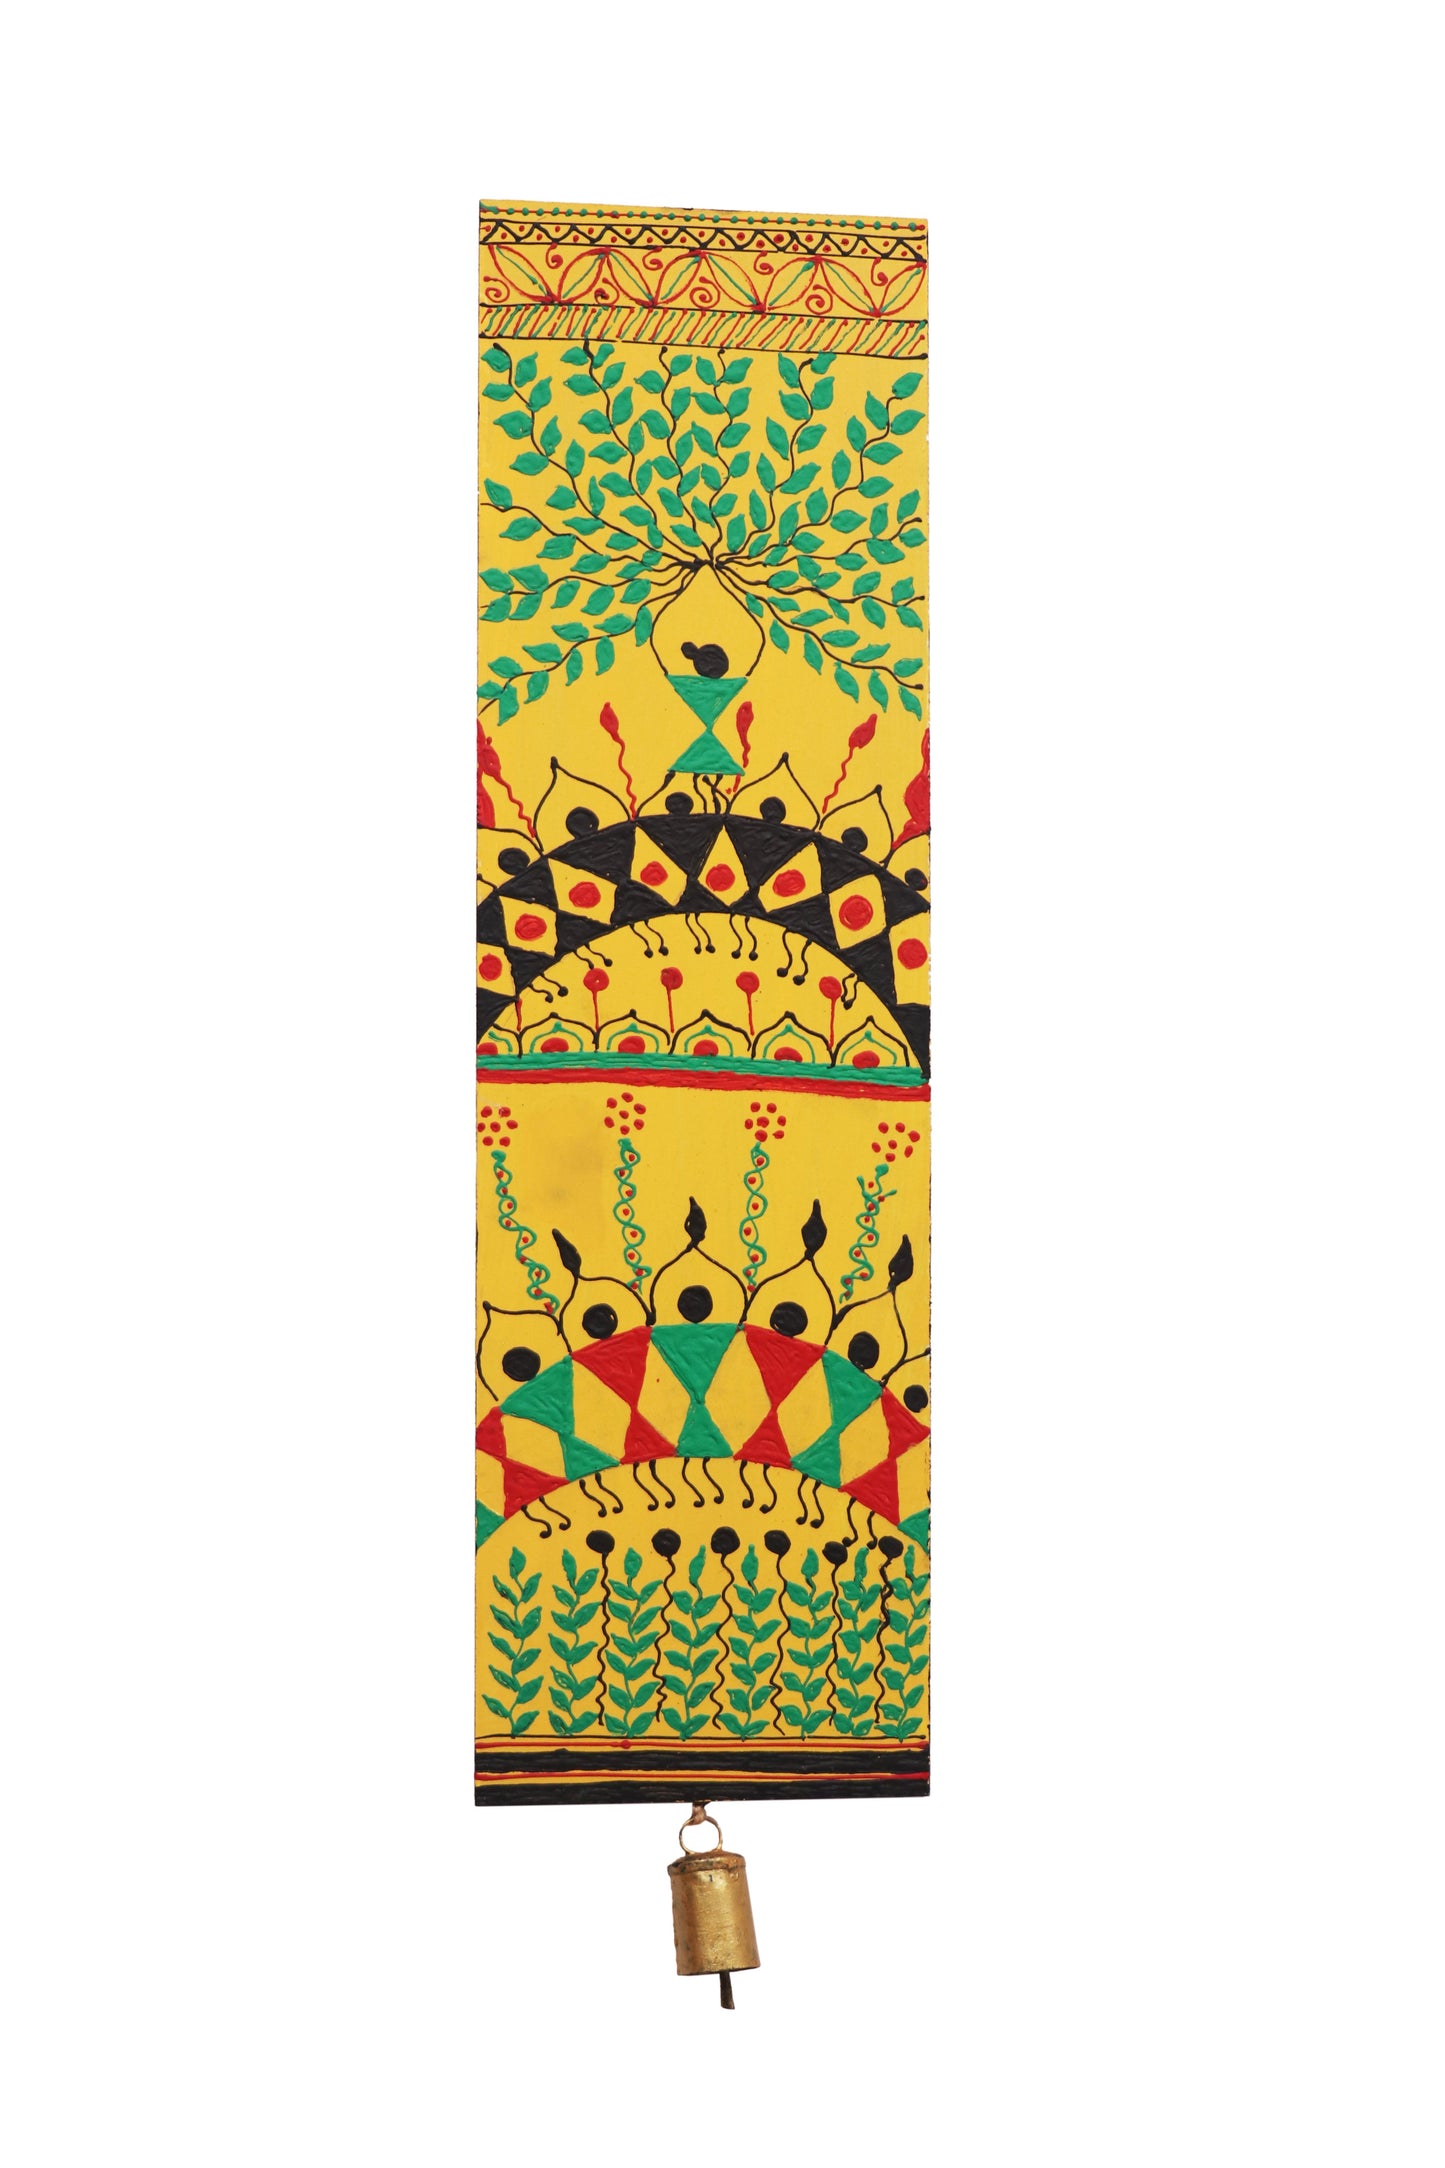 Handcrafted Yellow Warli Wall Painting Panels